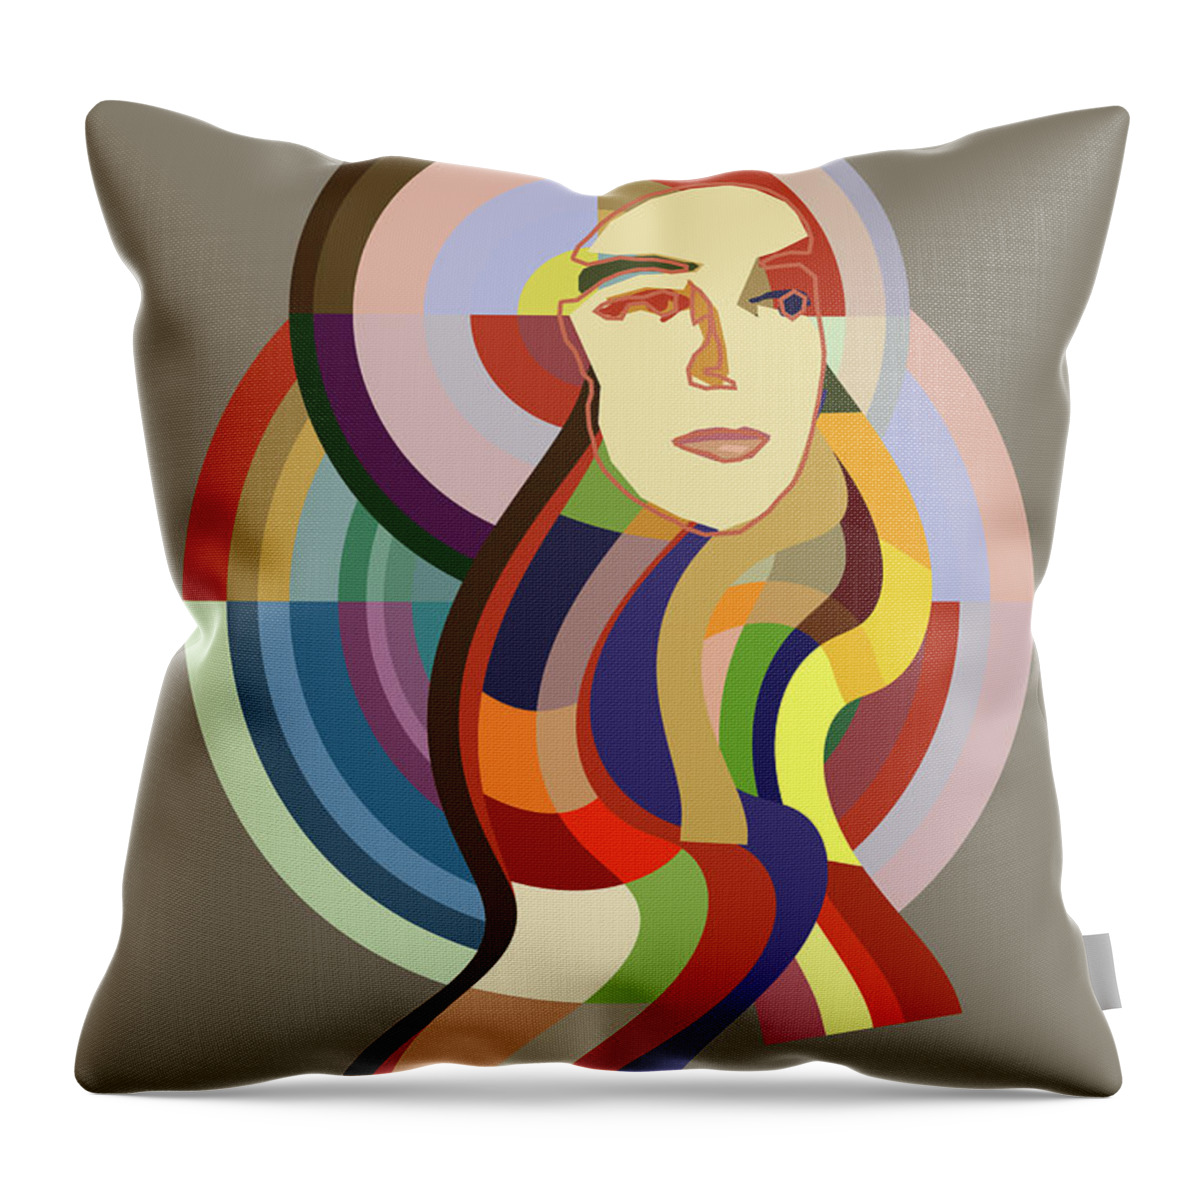 Sonia Delaunay Orphiste Tencc Throw Pillow featuring the digital art Orphiste - Pop Art Portrait of Sonia Delaunay by Big Fat Arts